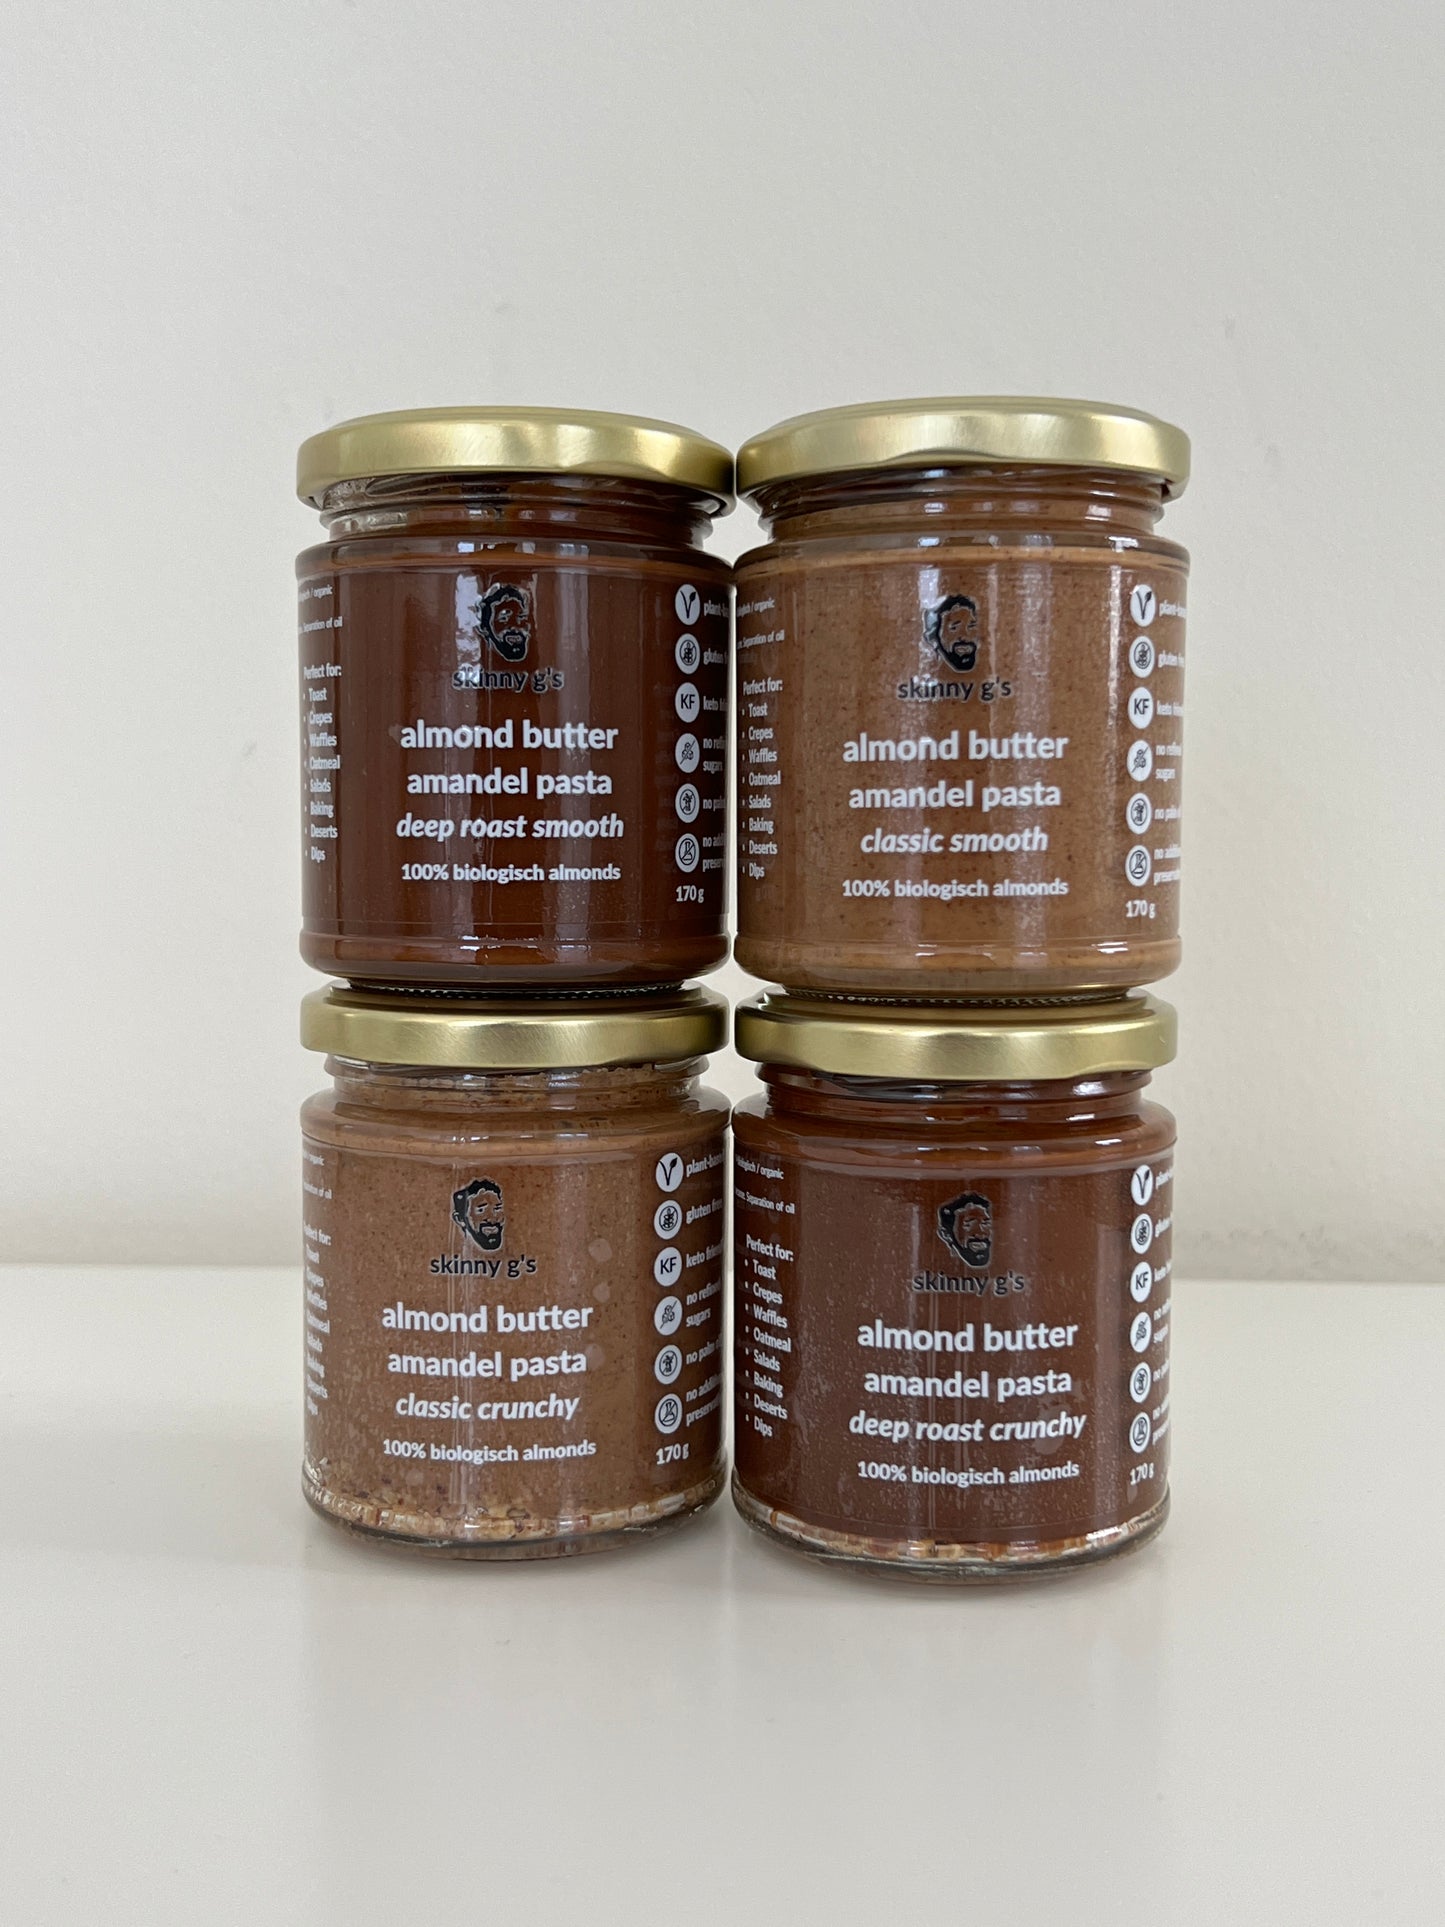 skinny g's almond butter in four flavours - classic smooth, classic crunchy, deep roast smooth and deep roast crunchy